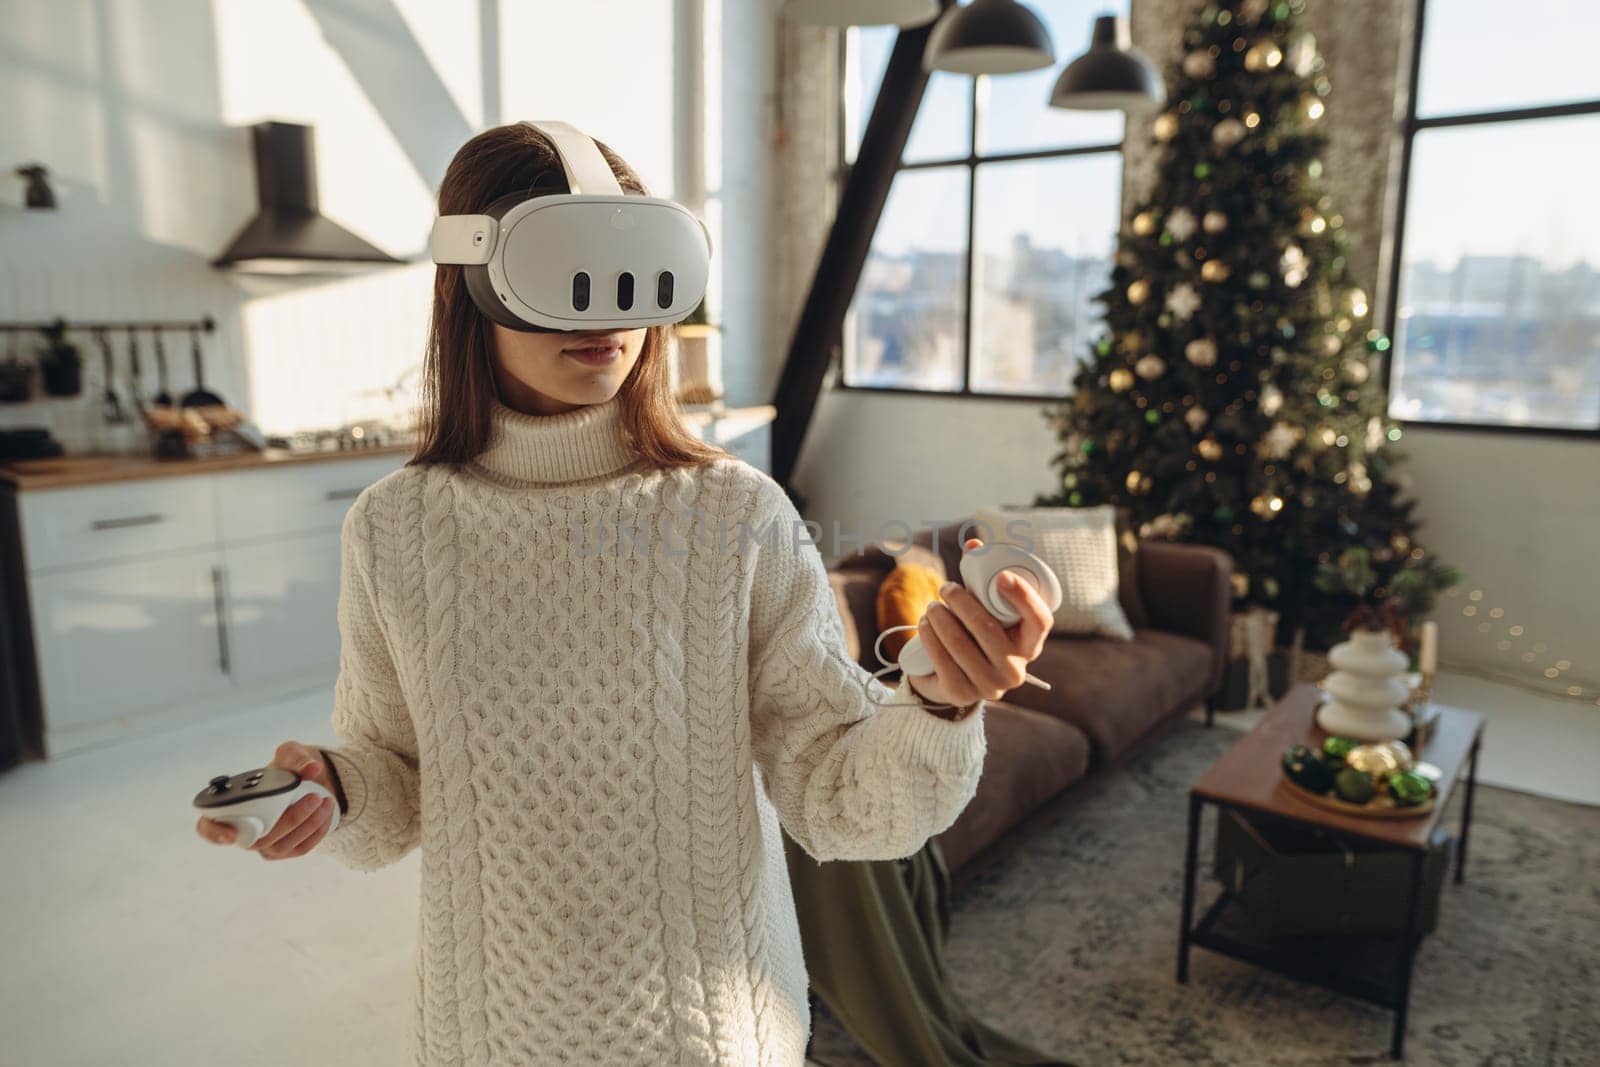 The girl, adorned in a VR headset, is narrating her virtual experiences. High quality photo